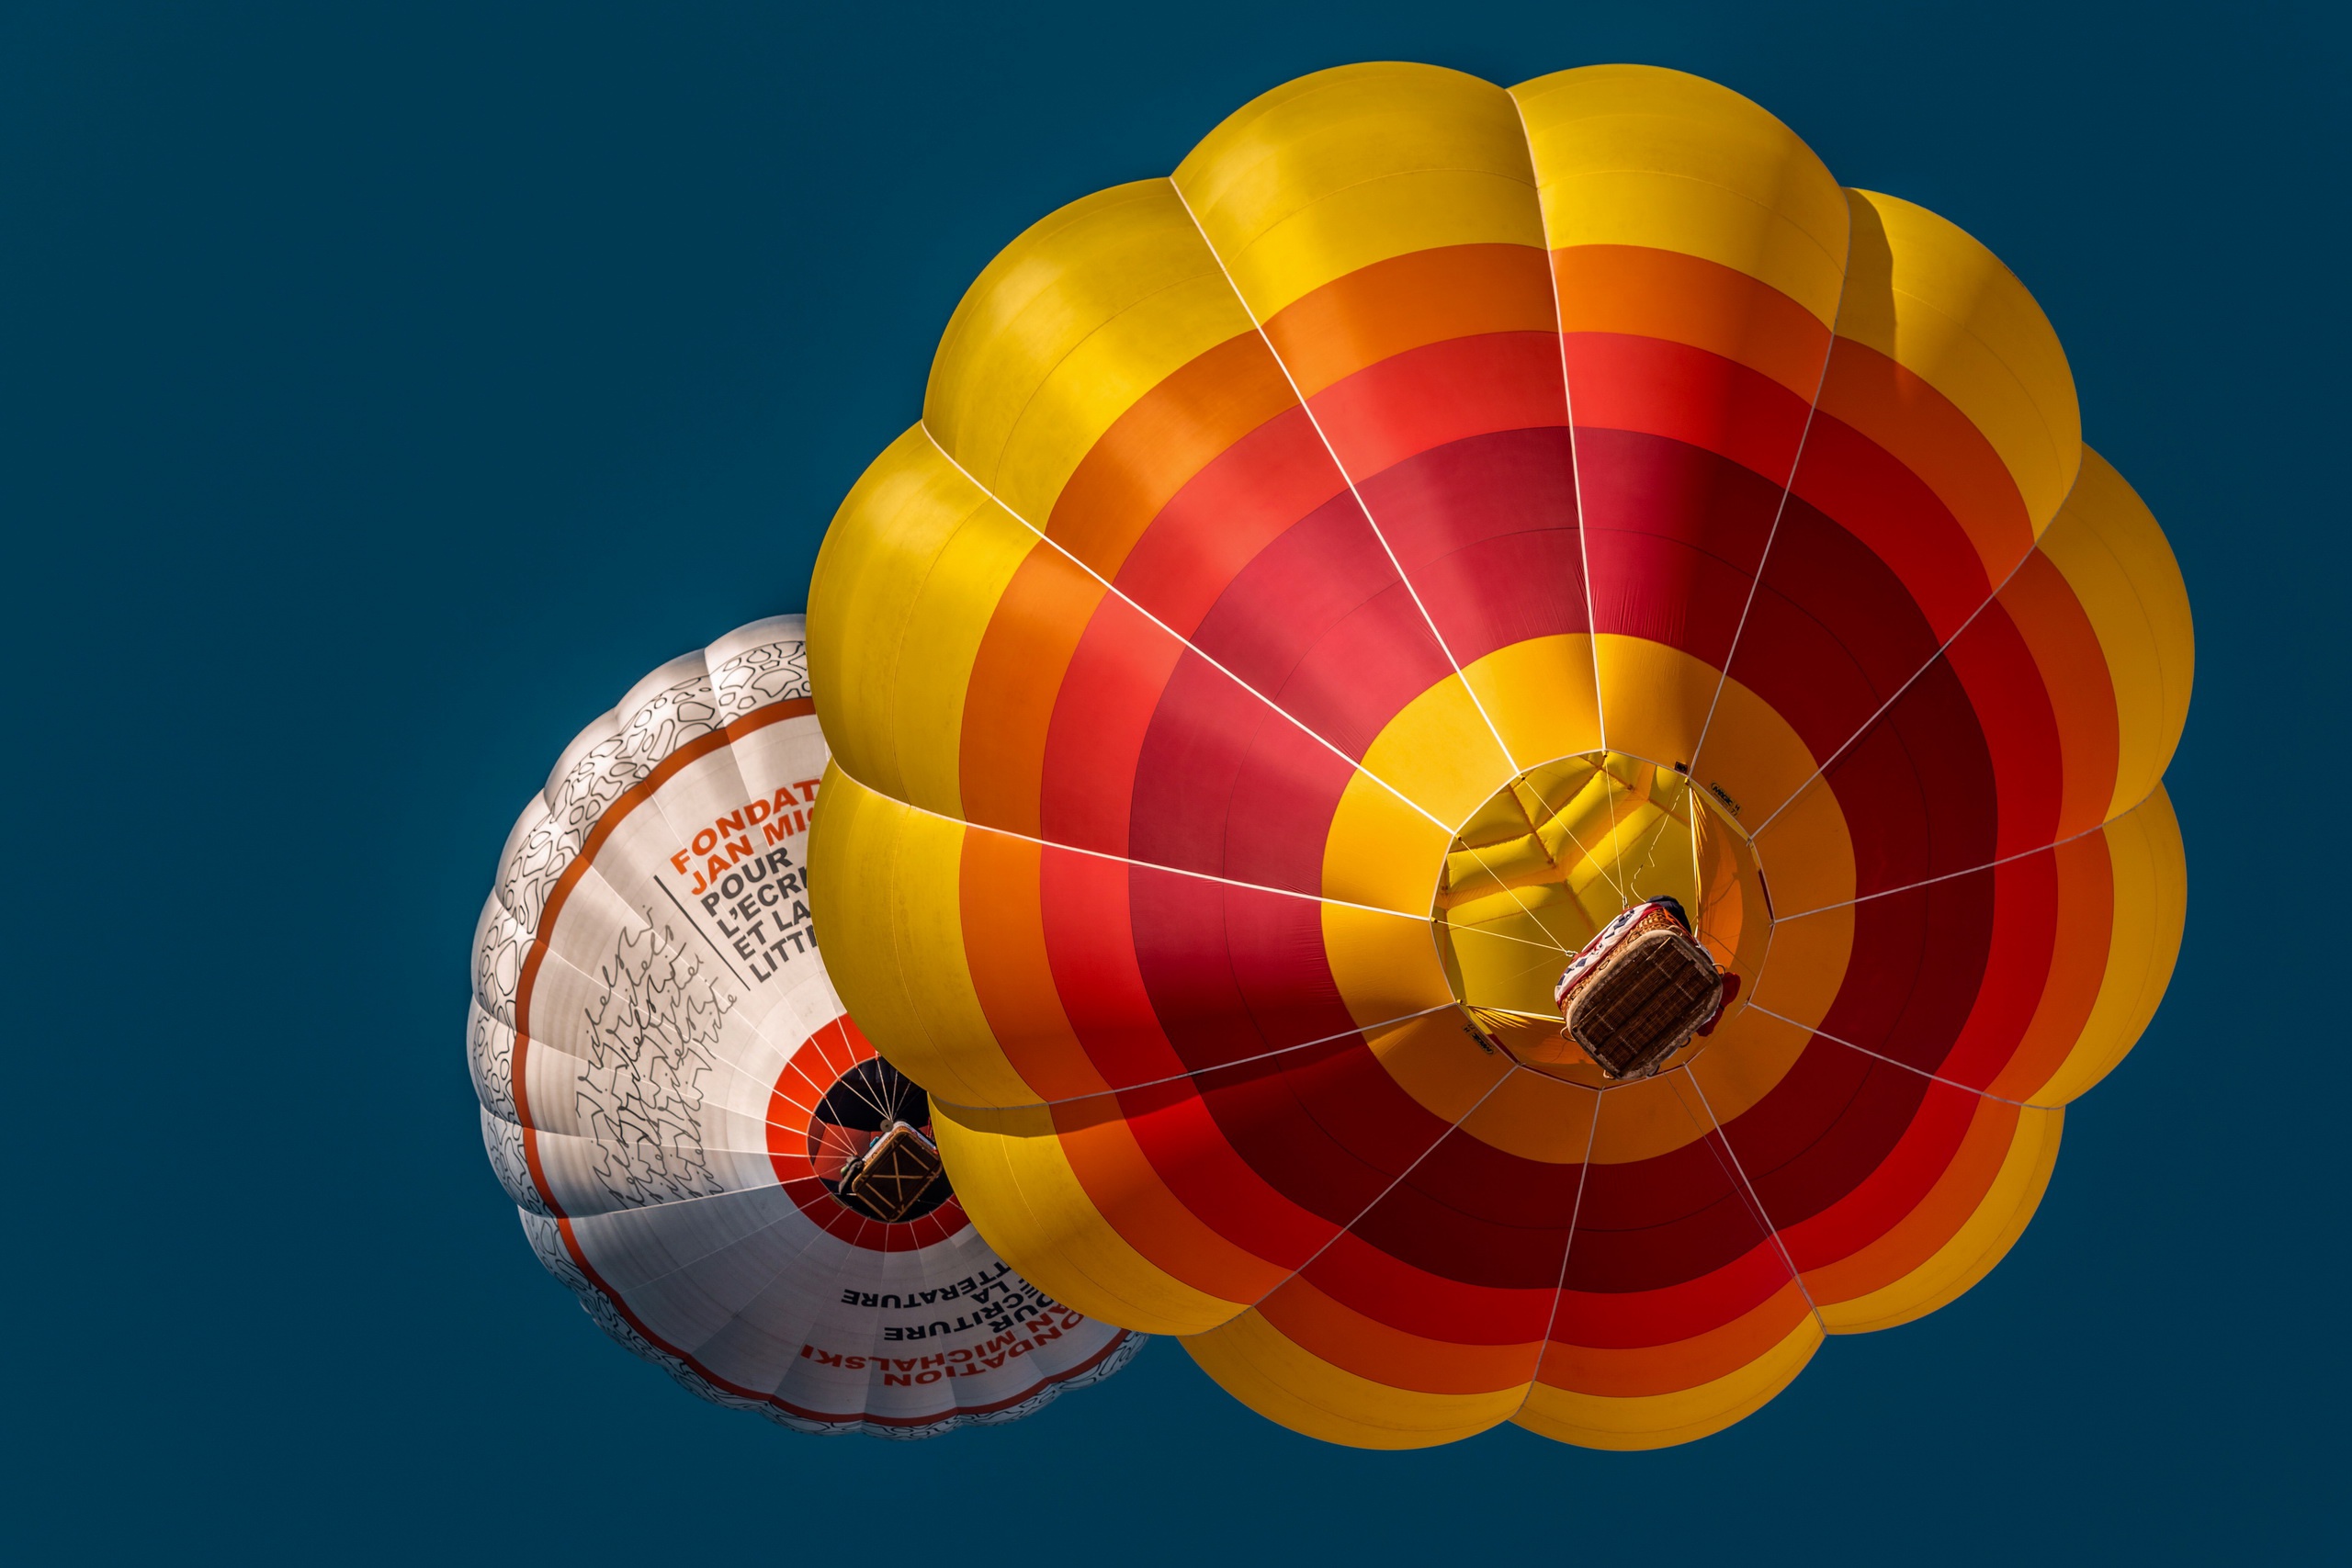 General 2560x1707 blue sky hot air balloons simple background low-angle